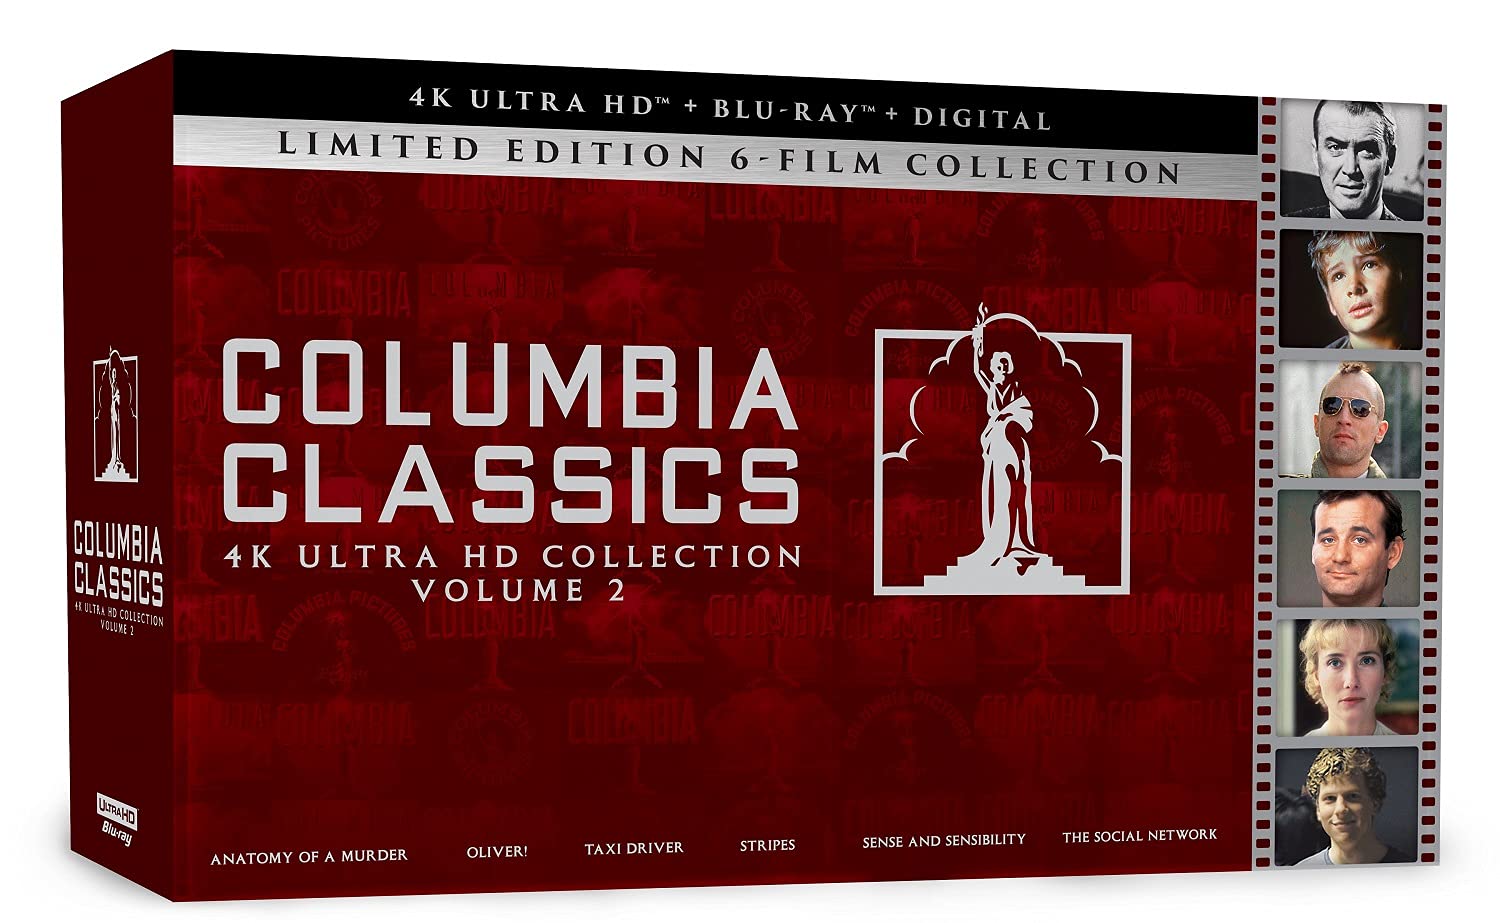 Columbia Classics Collection Volume 2 $88.99 at Amazon and Walmart